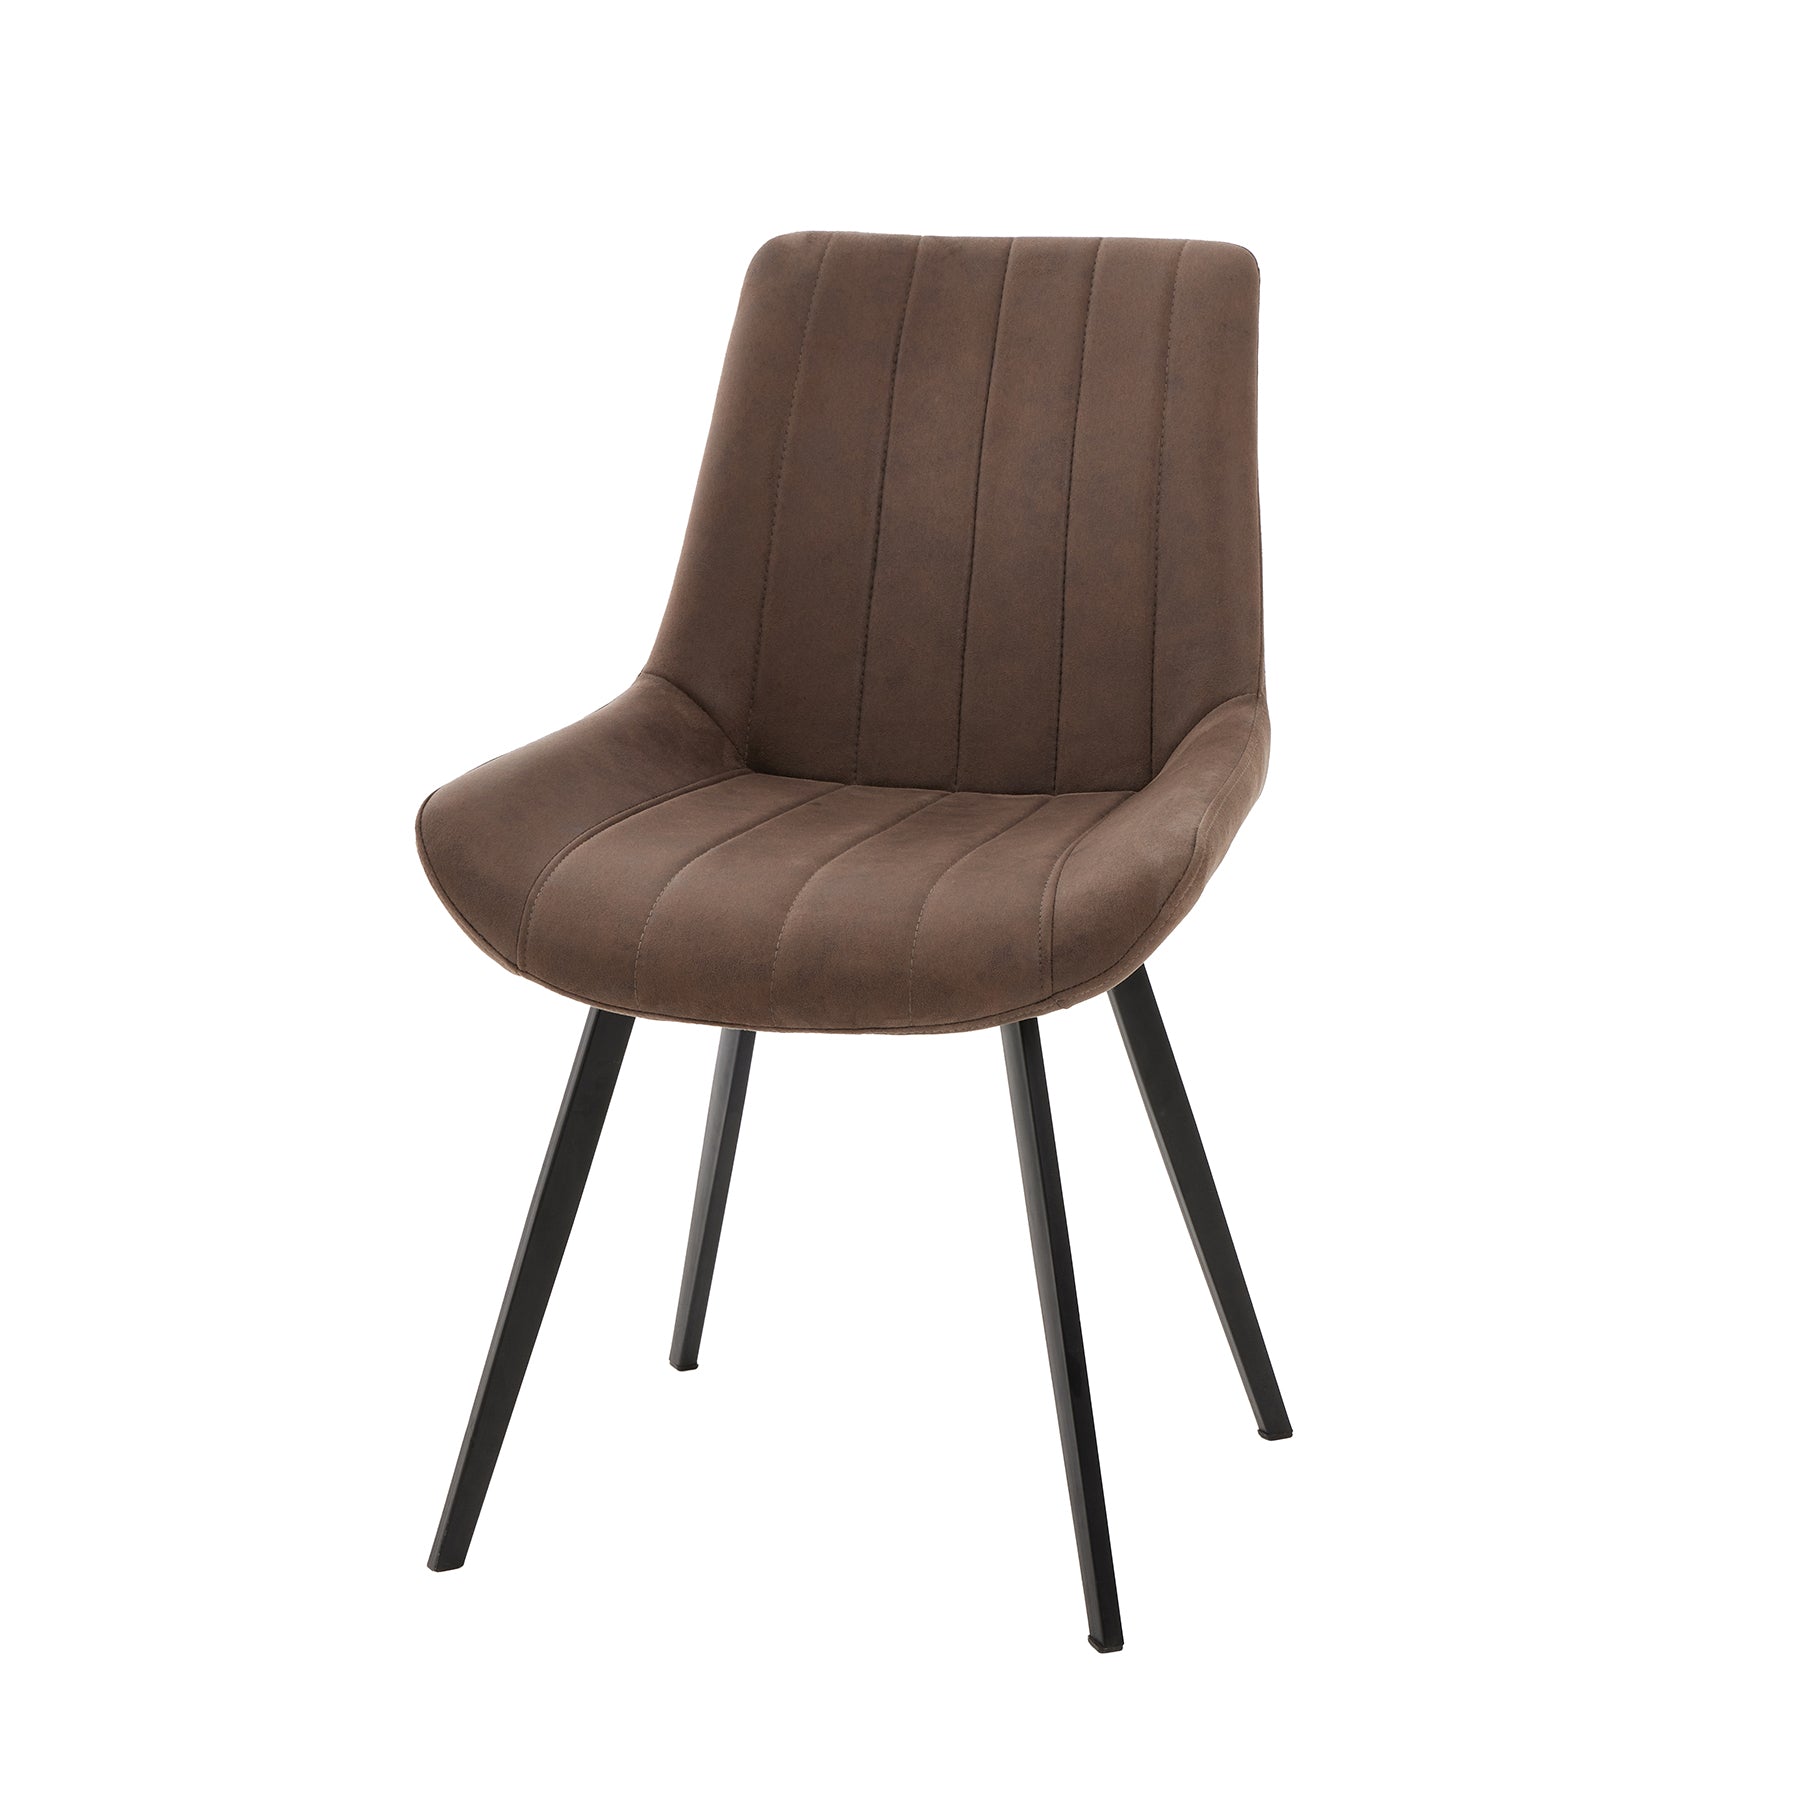 View Malmo Grey Dining Chair information